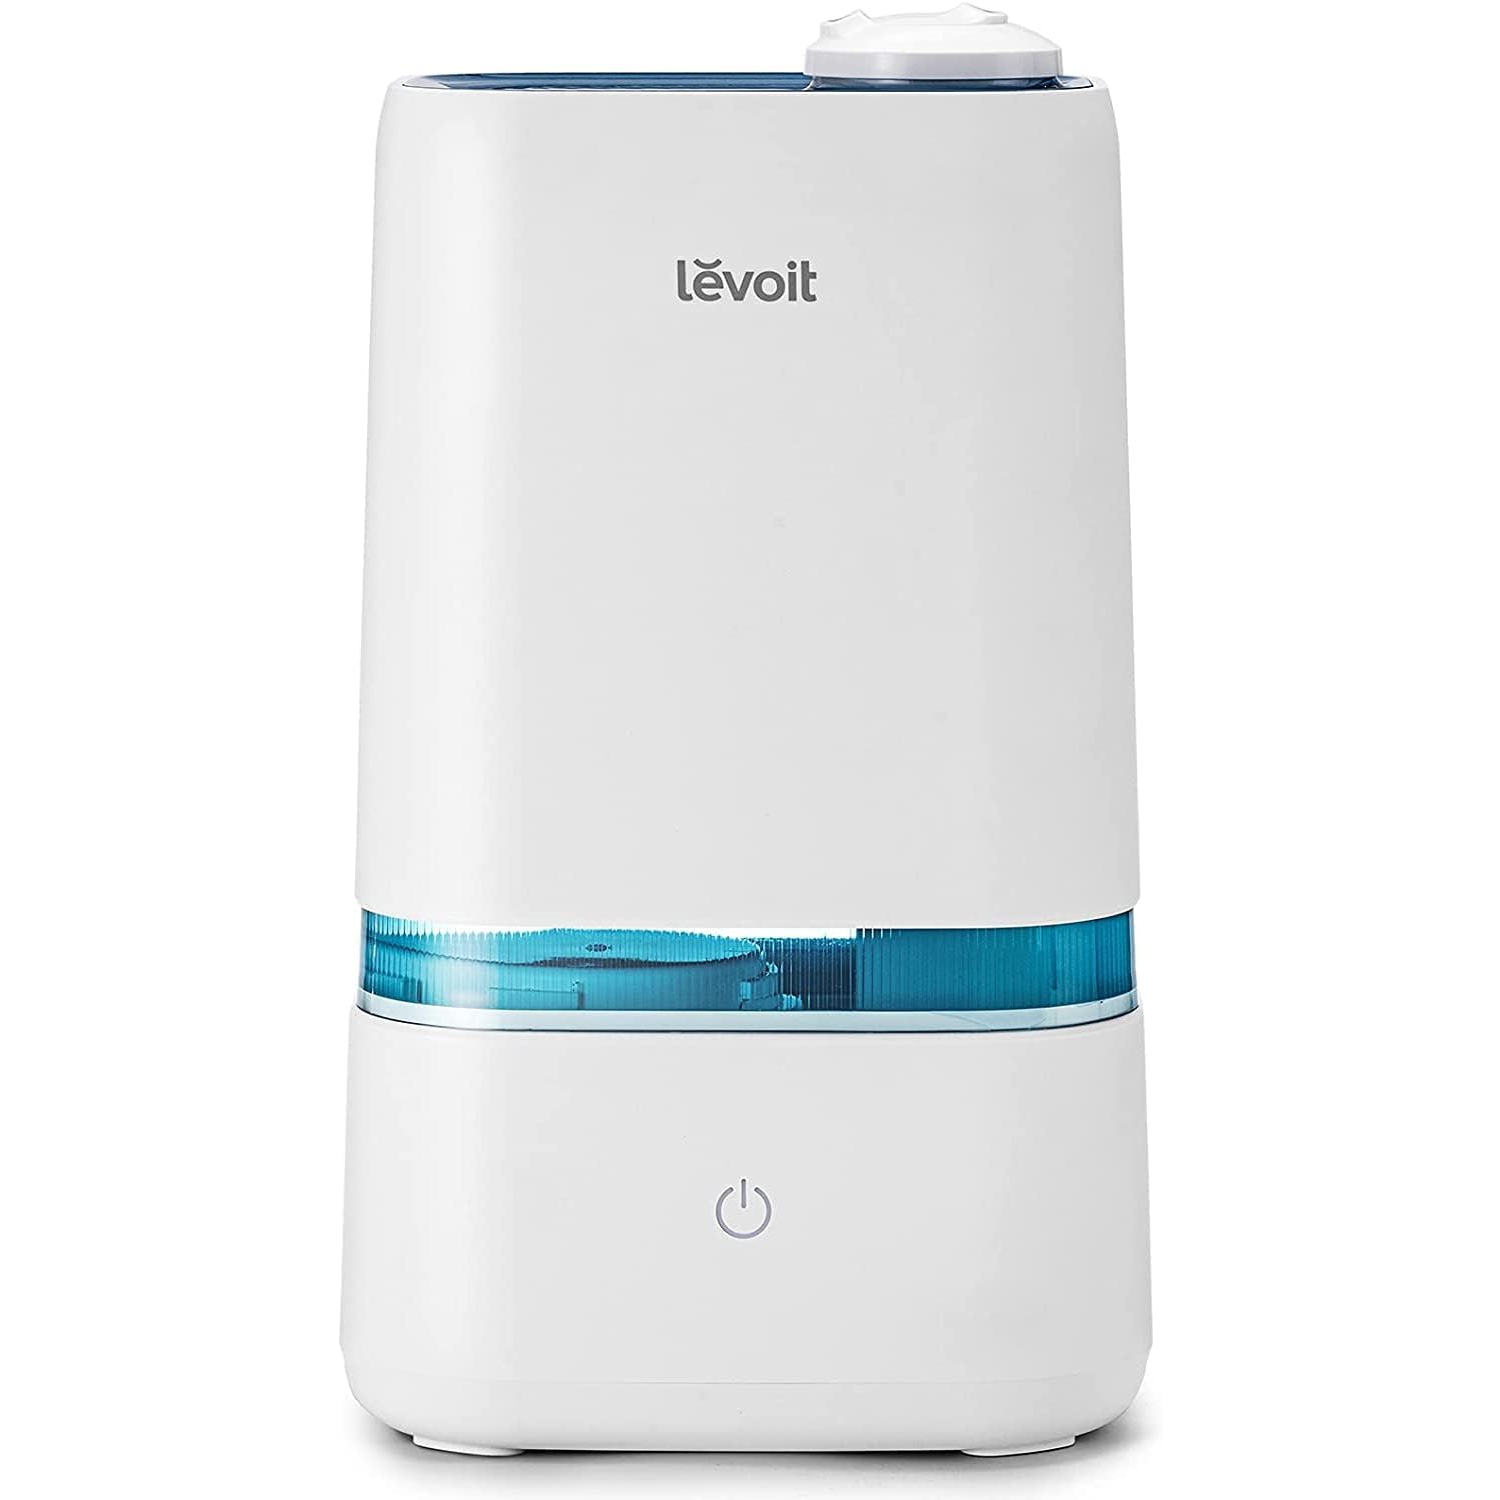 LEVOIT Humidifier for Bedroom, 4L Cool Mist Humidifiers for Plants, Baby Nursery with Essential Oil Tray, Quiet Operation, BPA Free, Last Up to 40h, White, Small